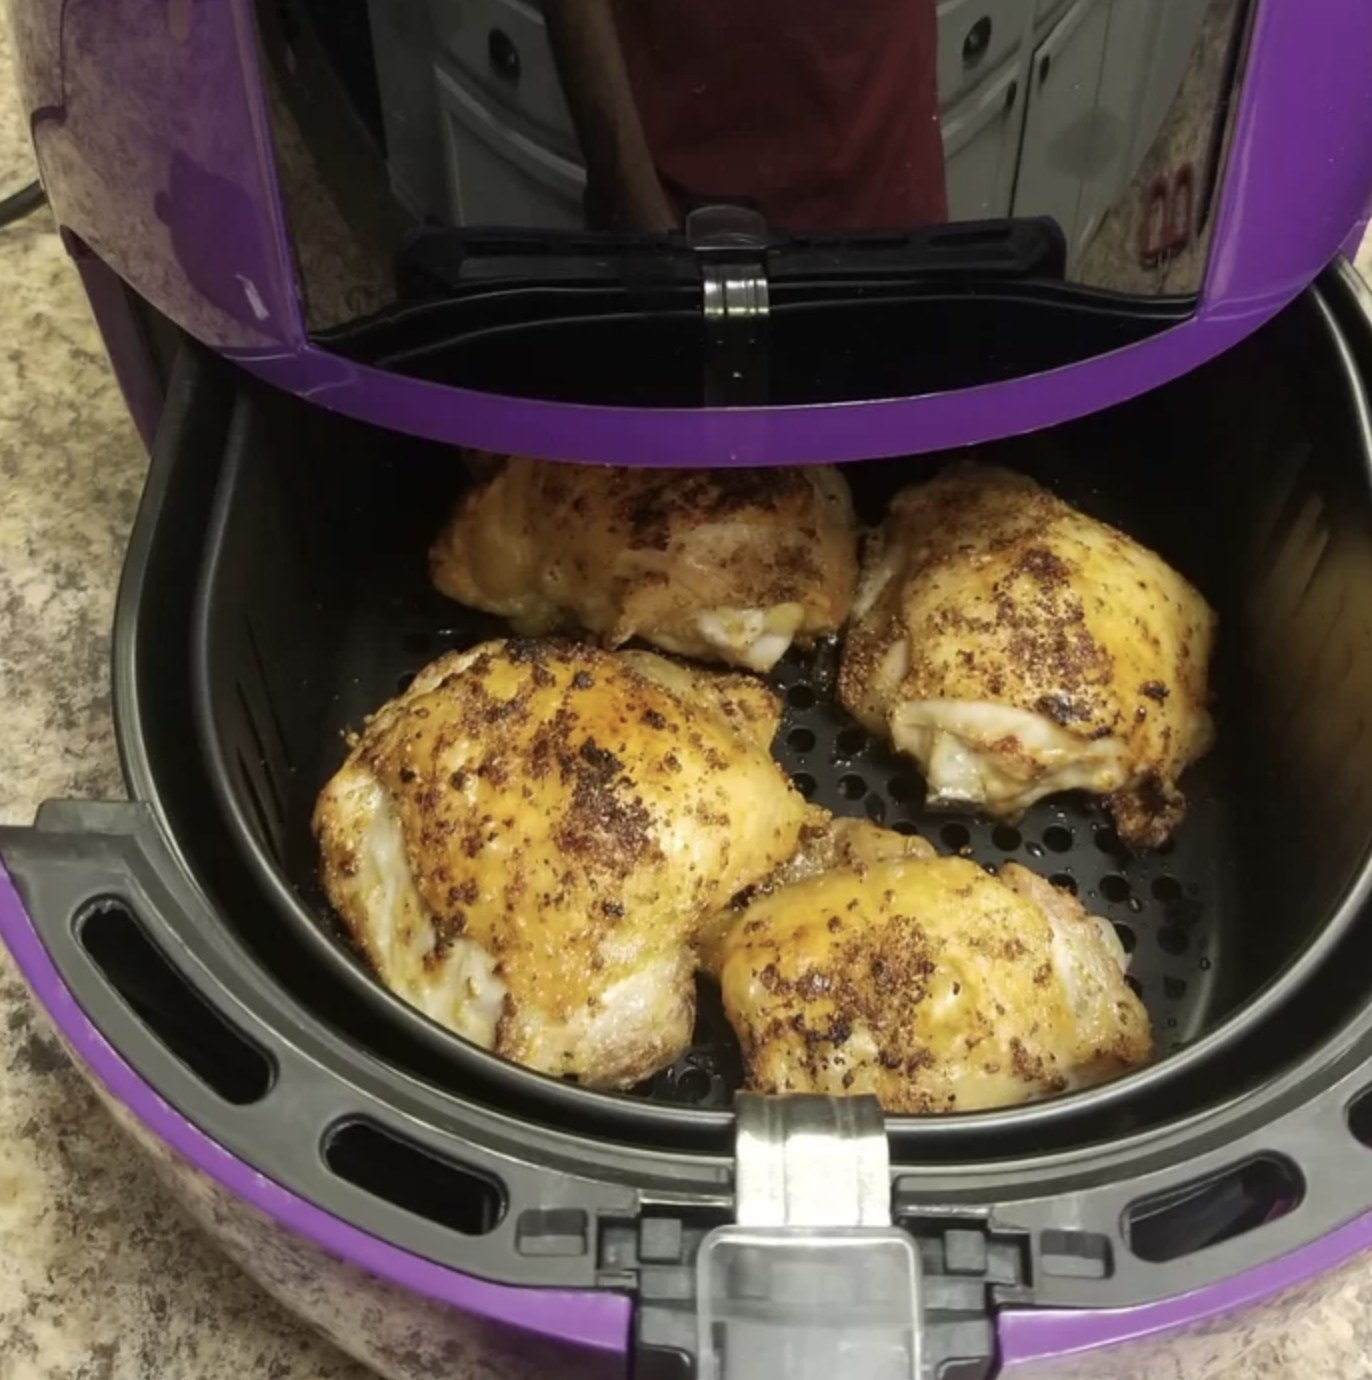 reviewer&#x27;s photo showing crispy chicken thighs inside the purple air fryer